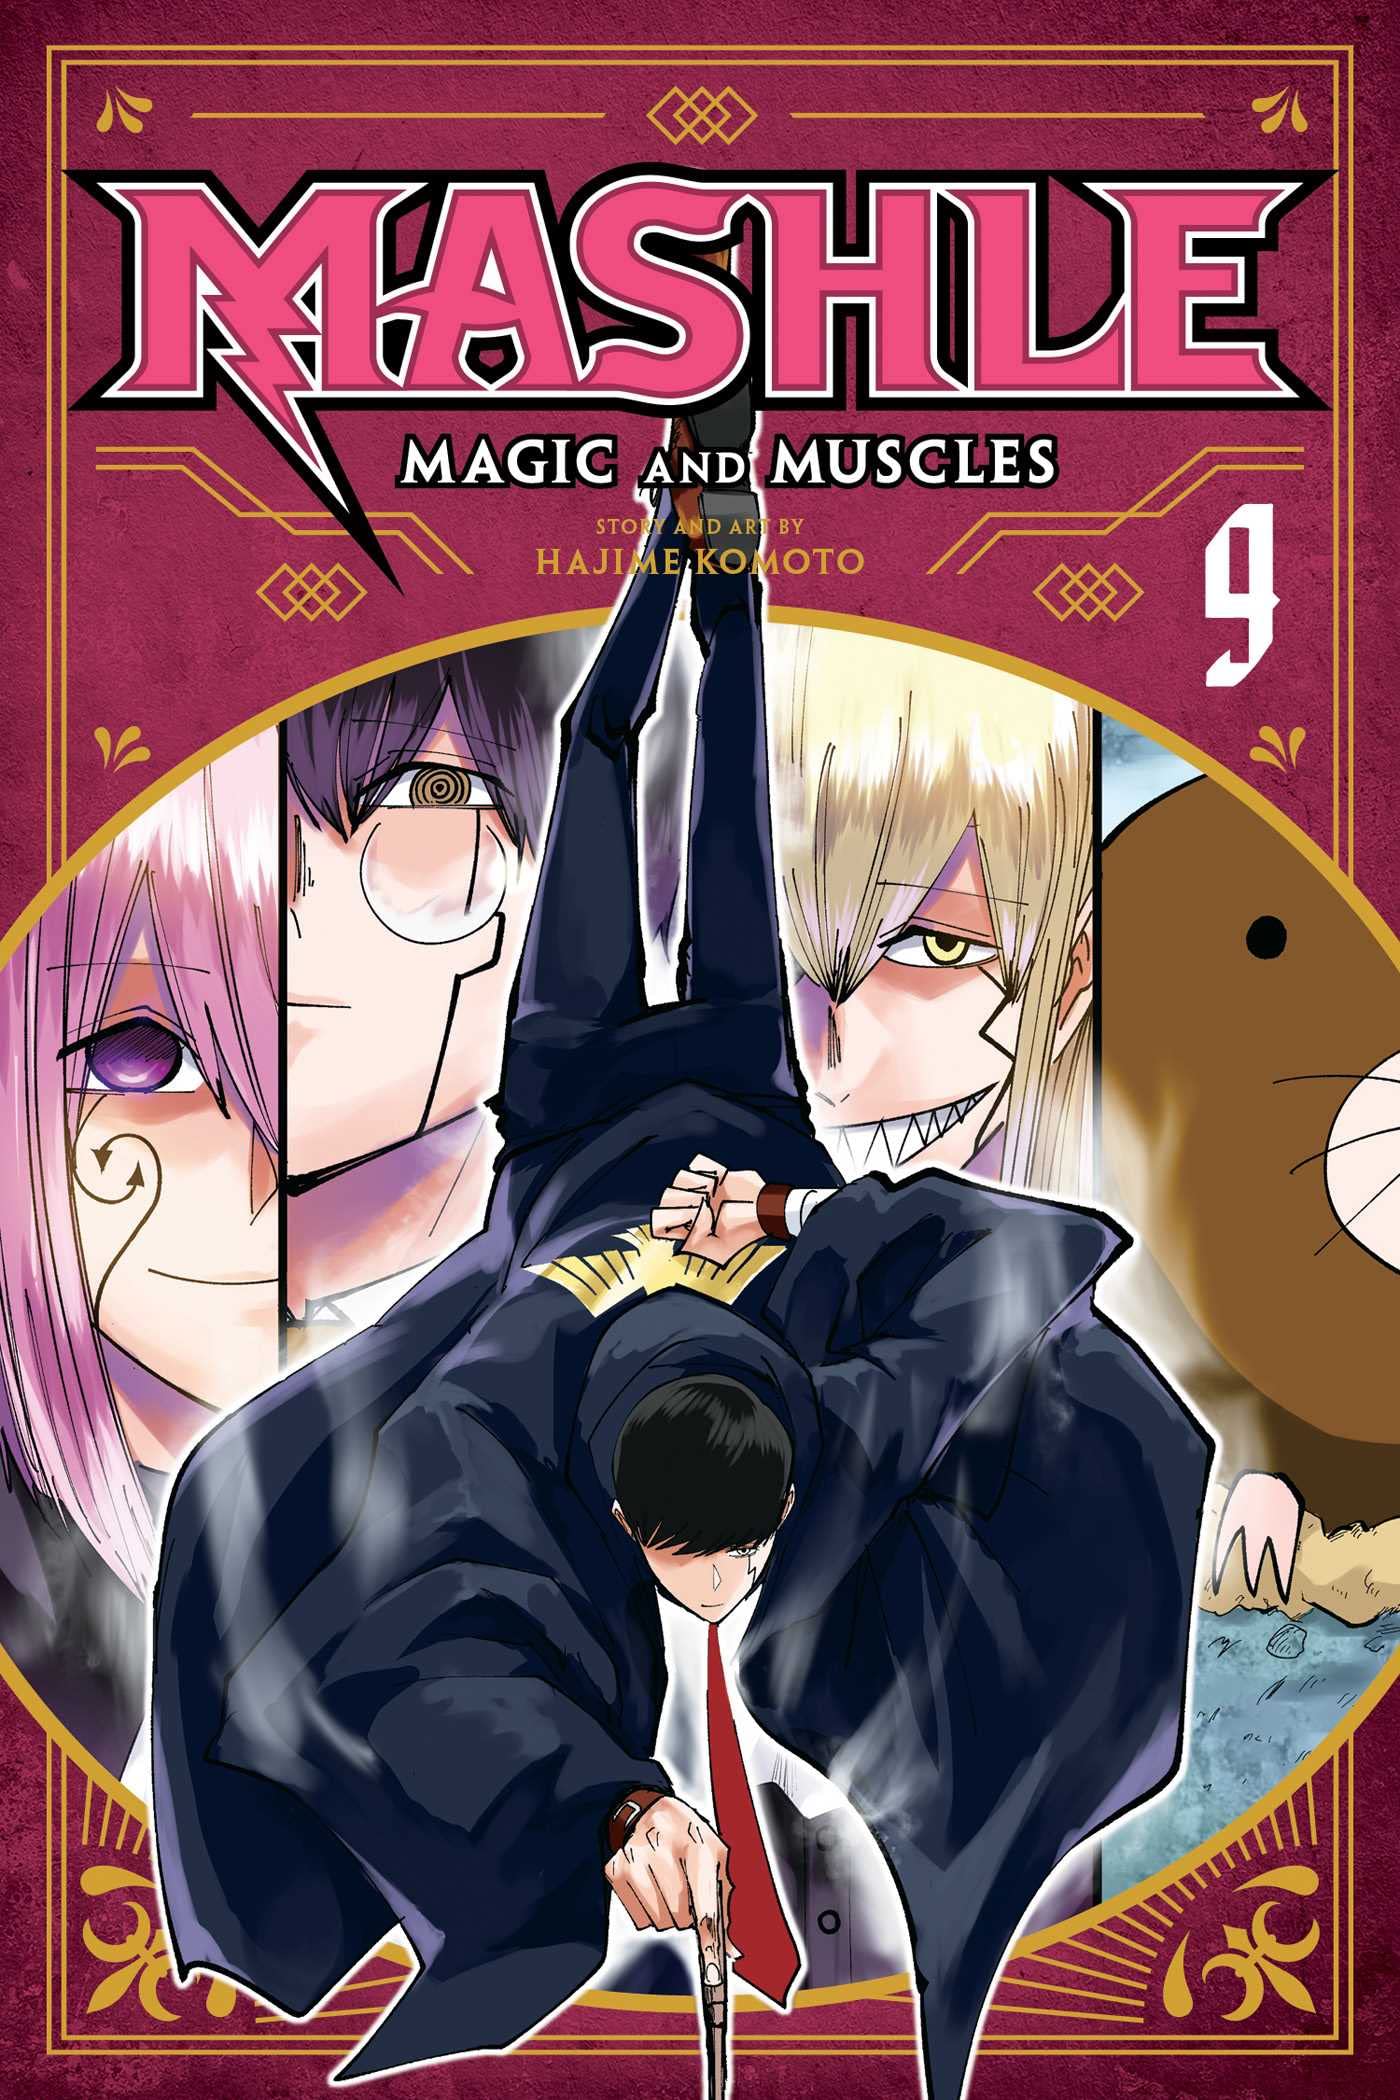 Mashle: Magic And Muscles Episode 10 Review - But Why Tho?